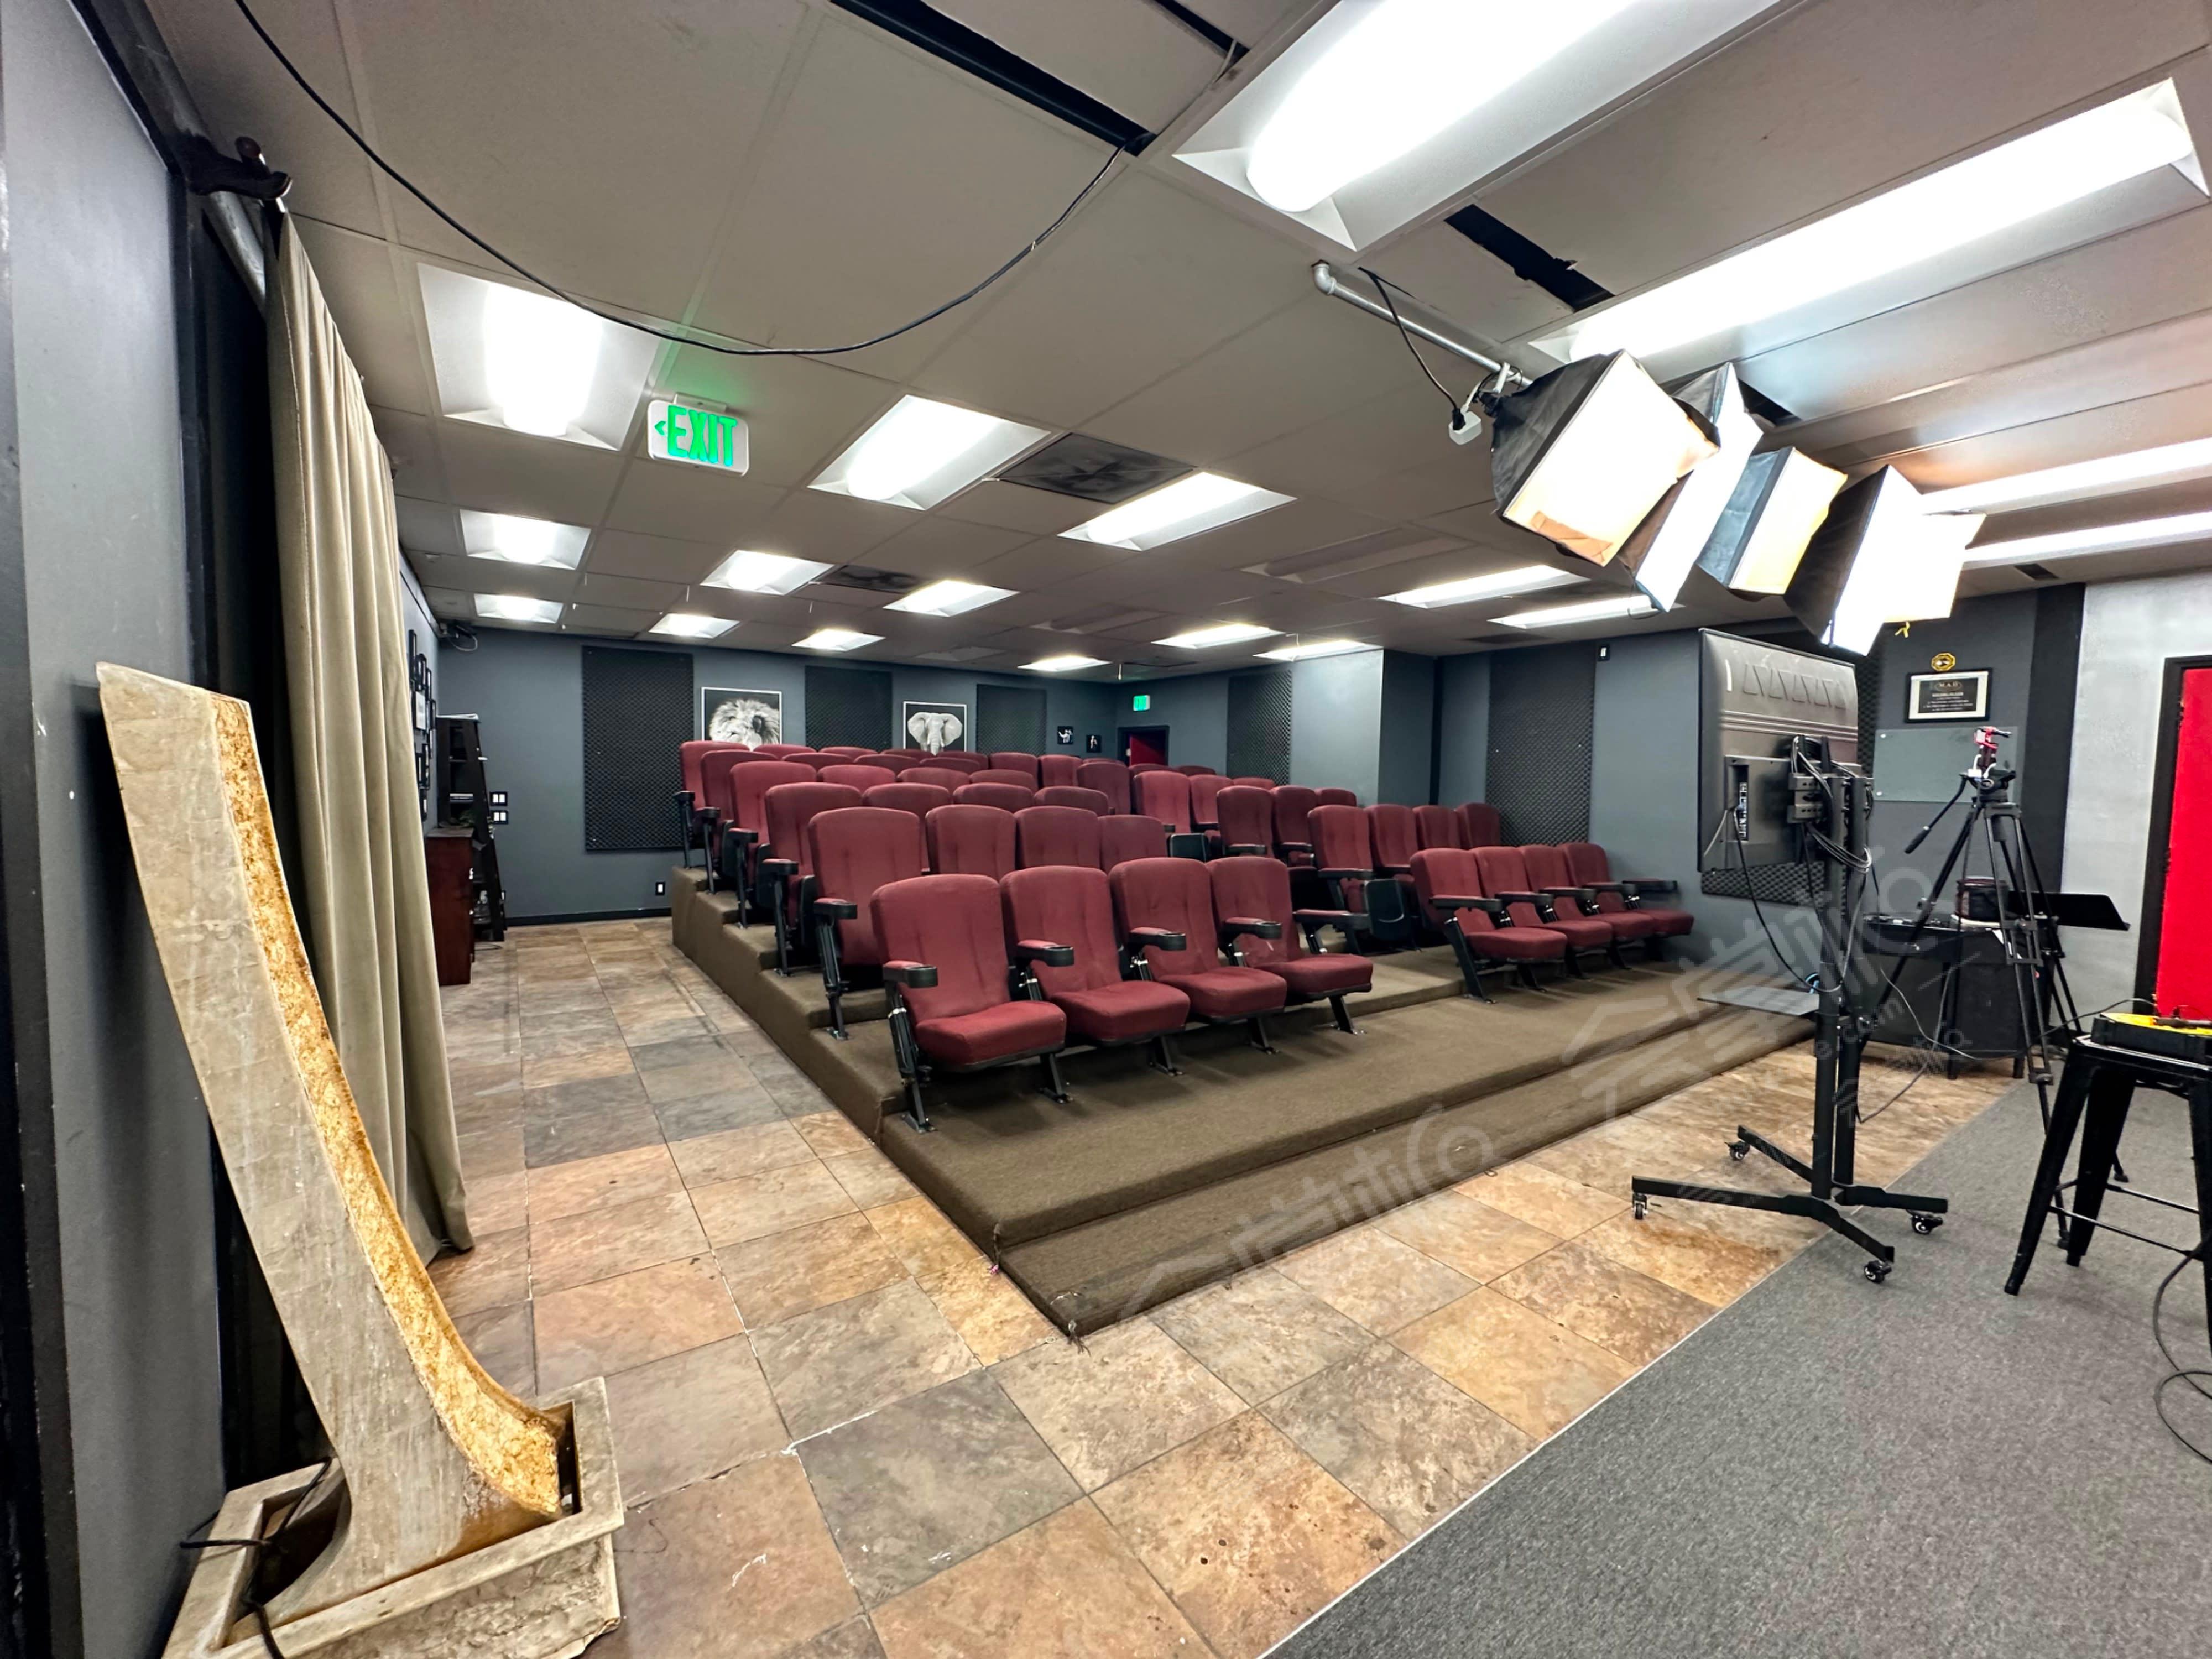 1200 sq ft 46 seat stadium theatre seating for scene study or on camera classes